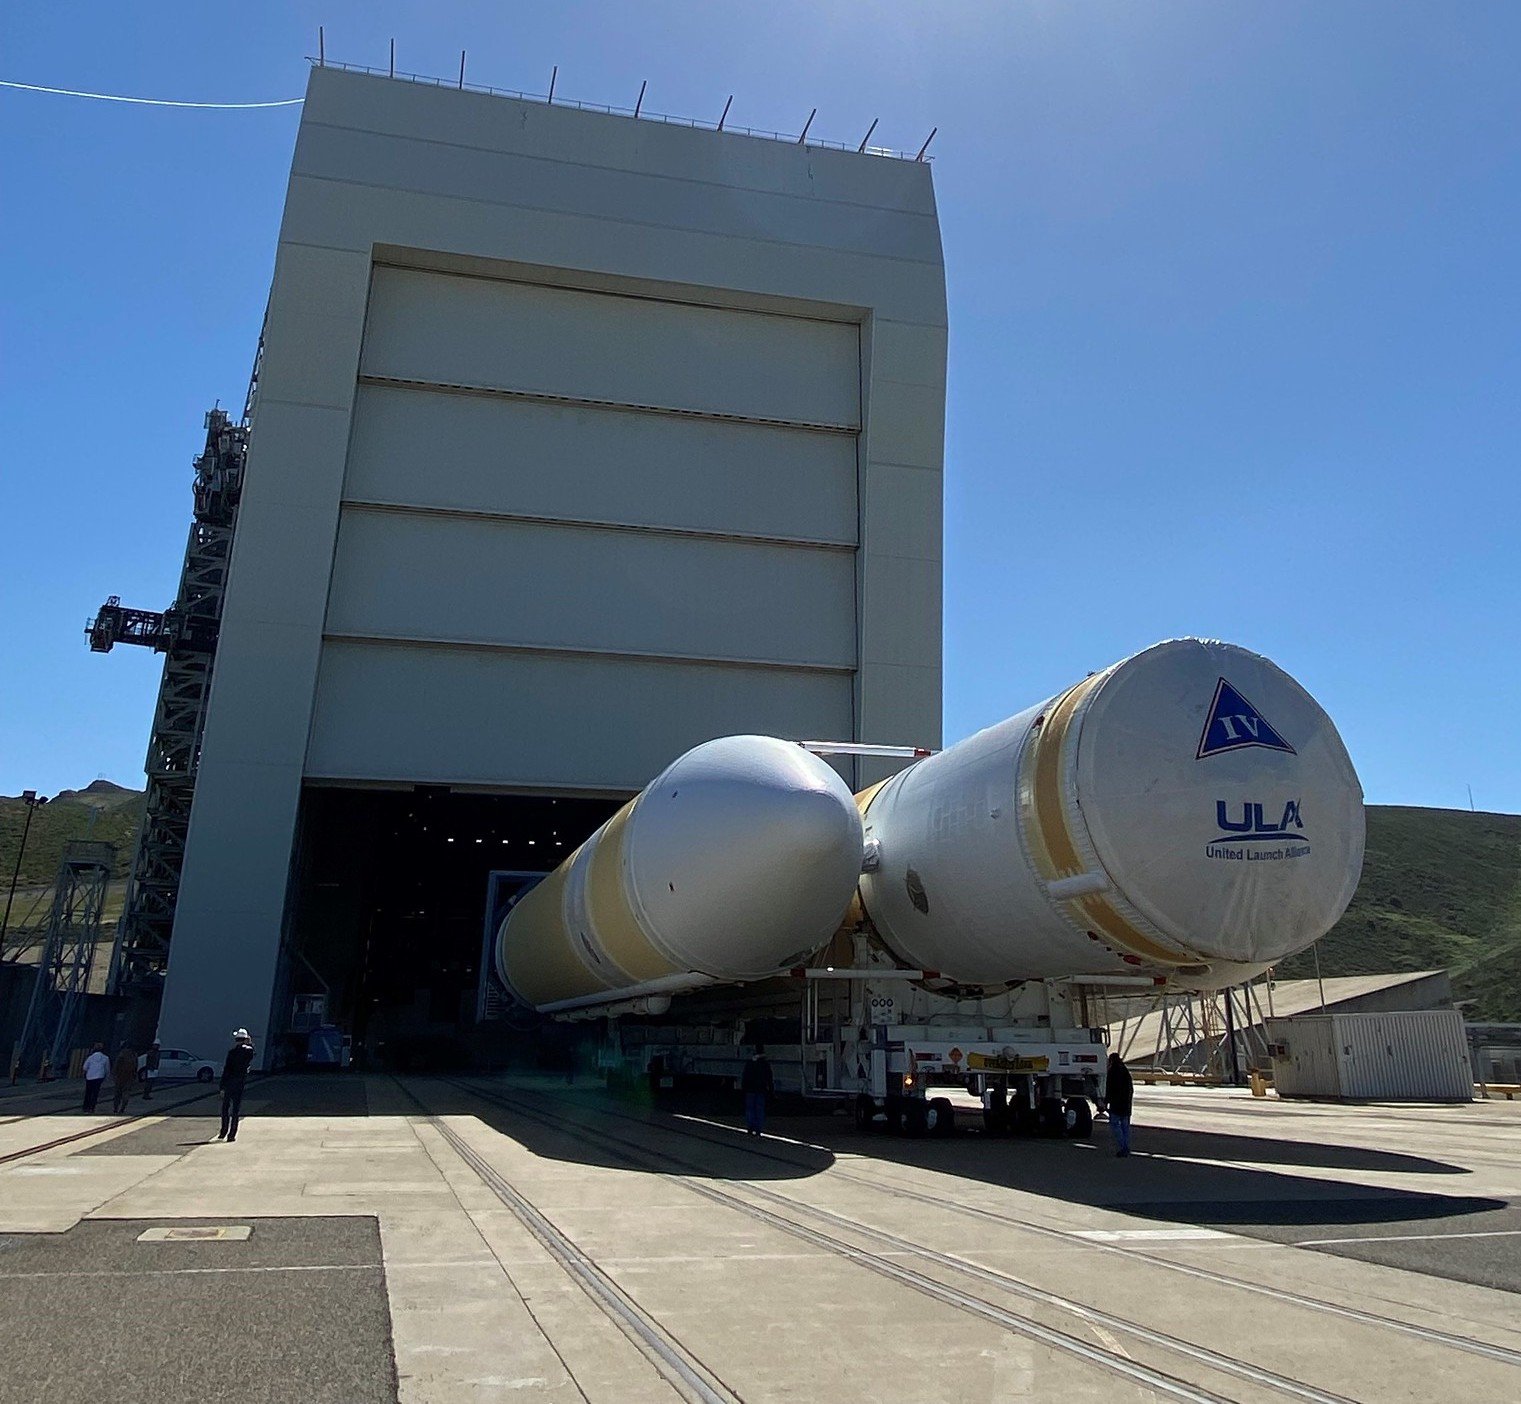 The Delta IV Heavy rocket is transported the SLC-6 pad. Photo by United Launch Alliance